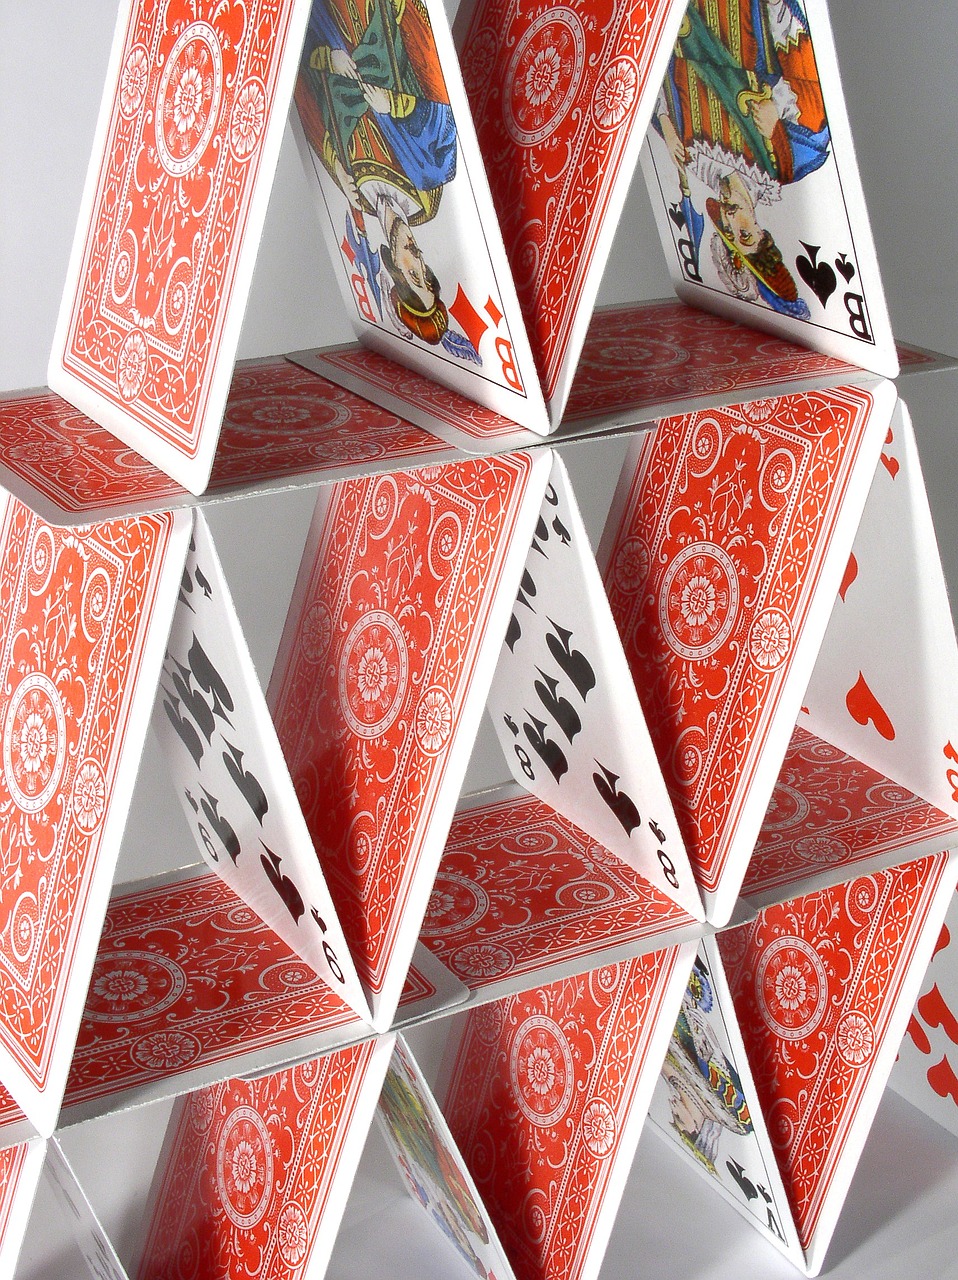 house of cards fragile playing cards free photo